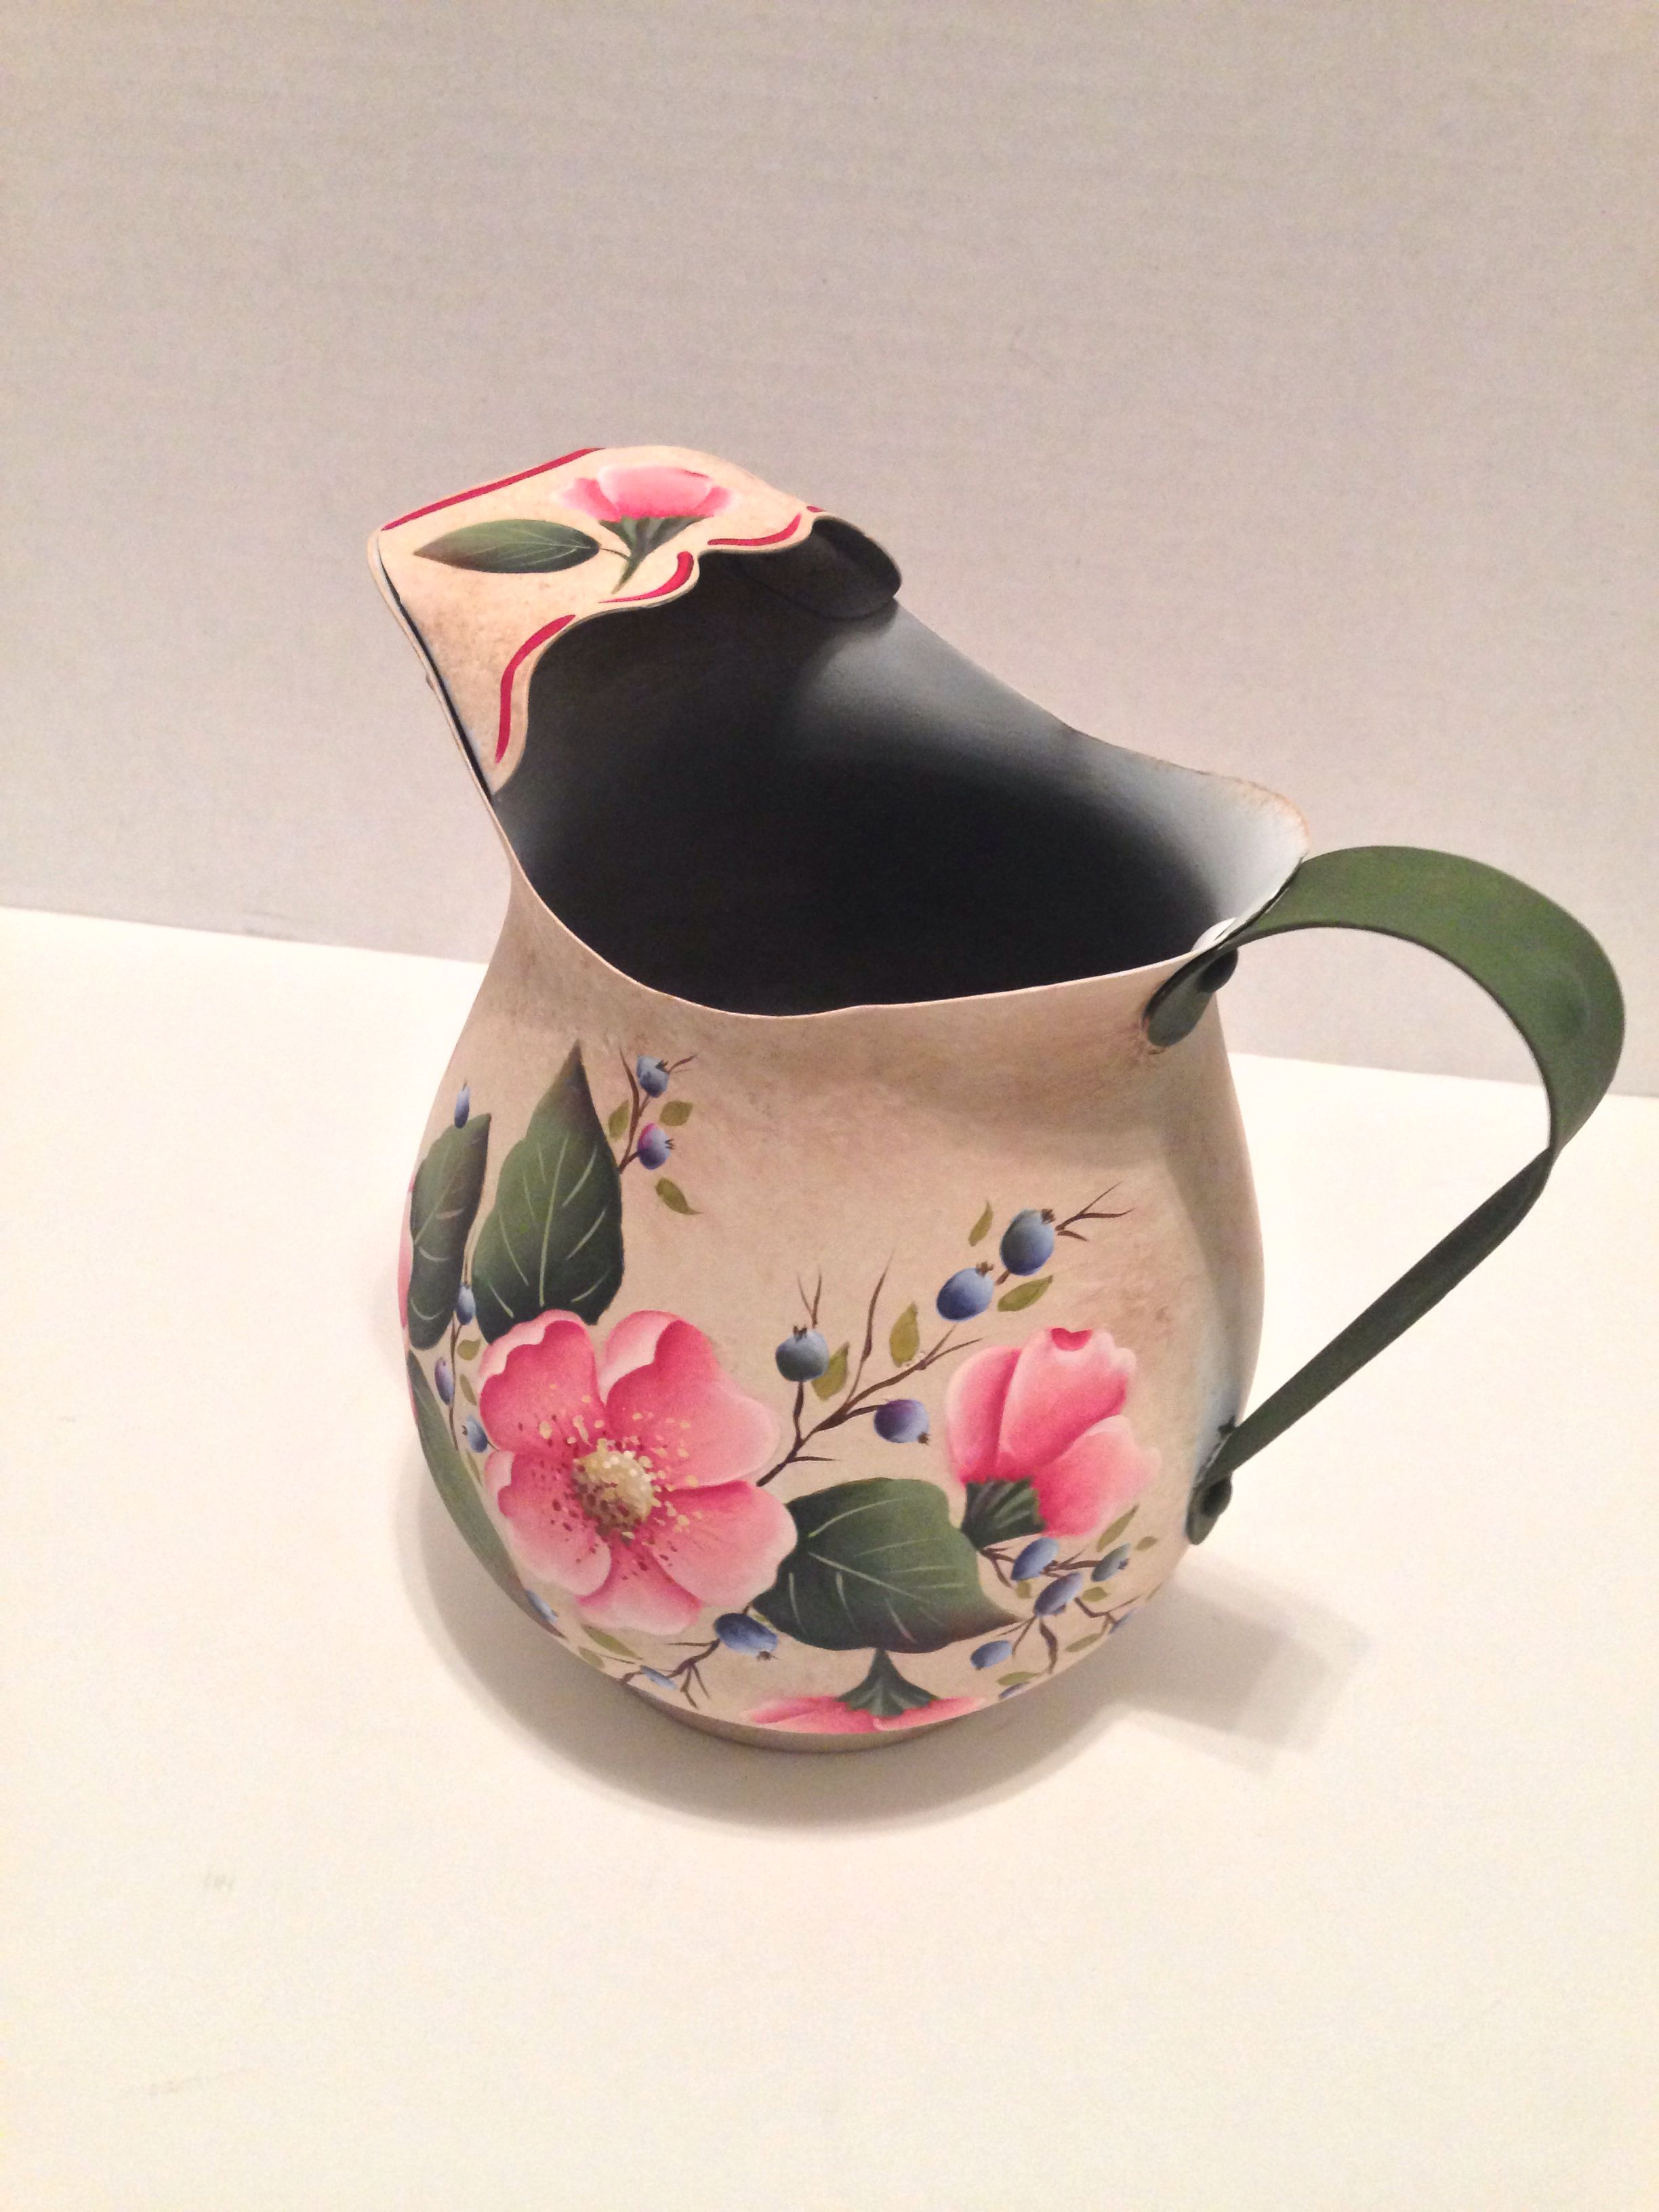 A old water pitcher I painted. | art | Pinterest | Water pitchers